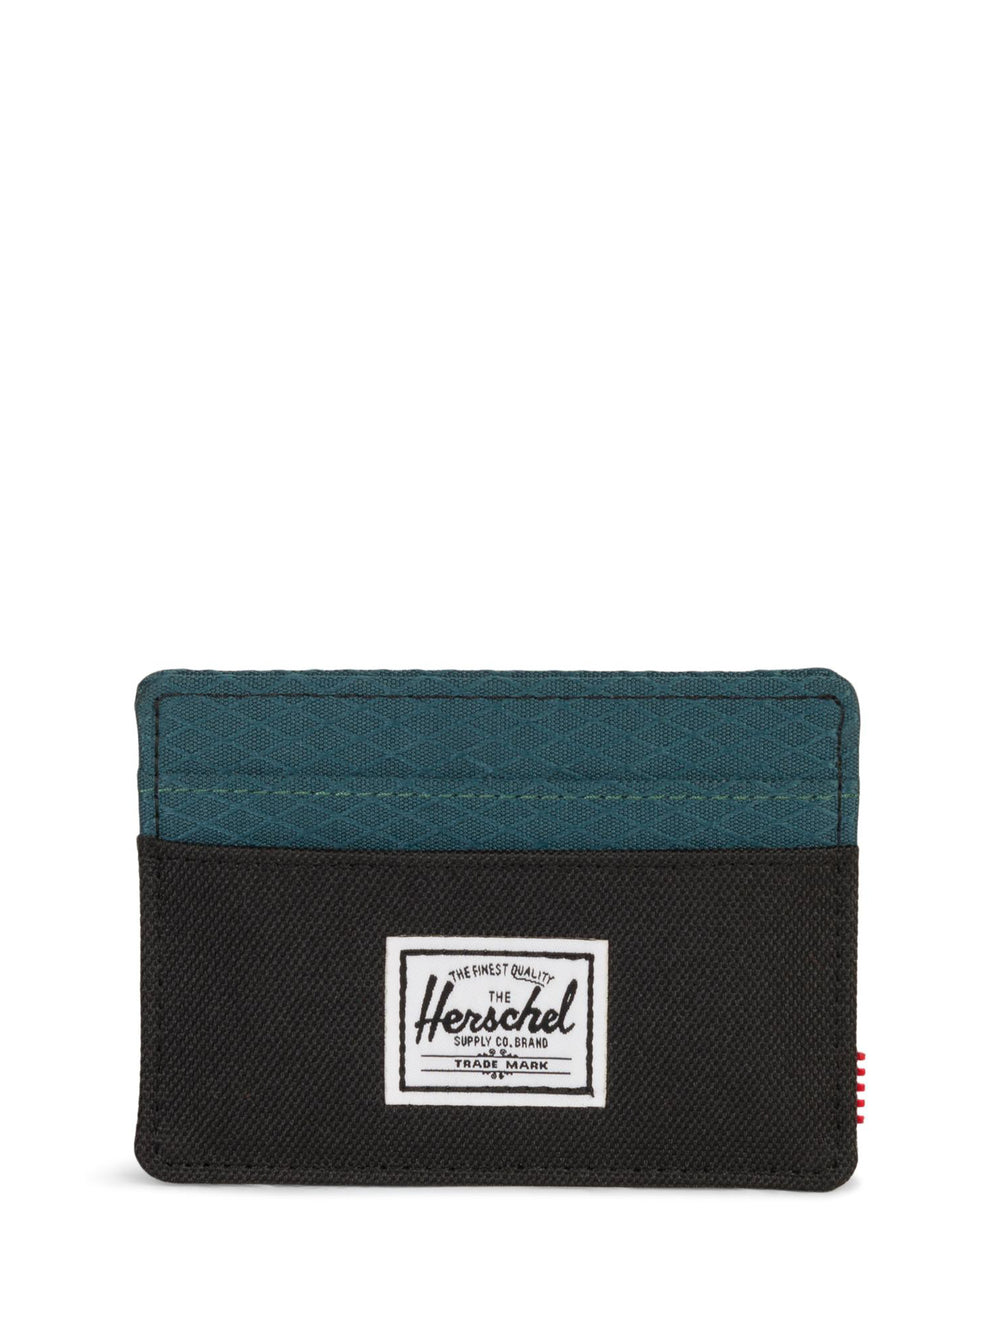 CHARLIE CARD WALLET  - CLEARANCE